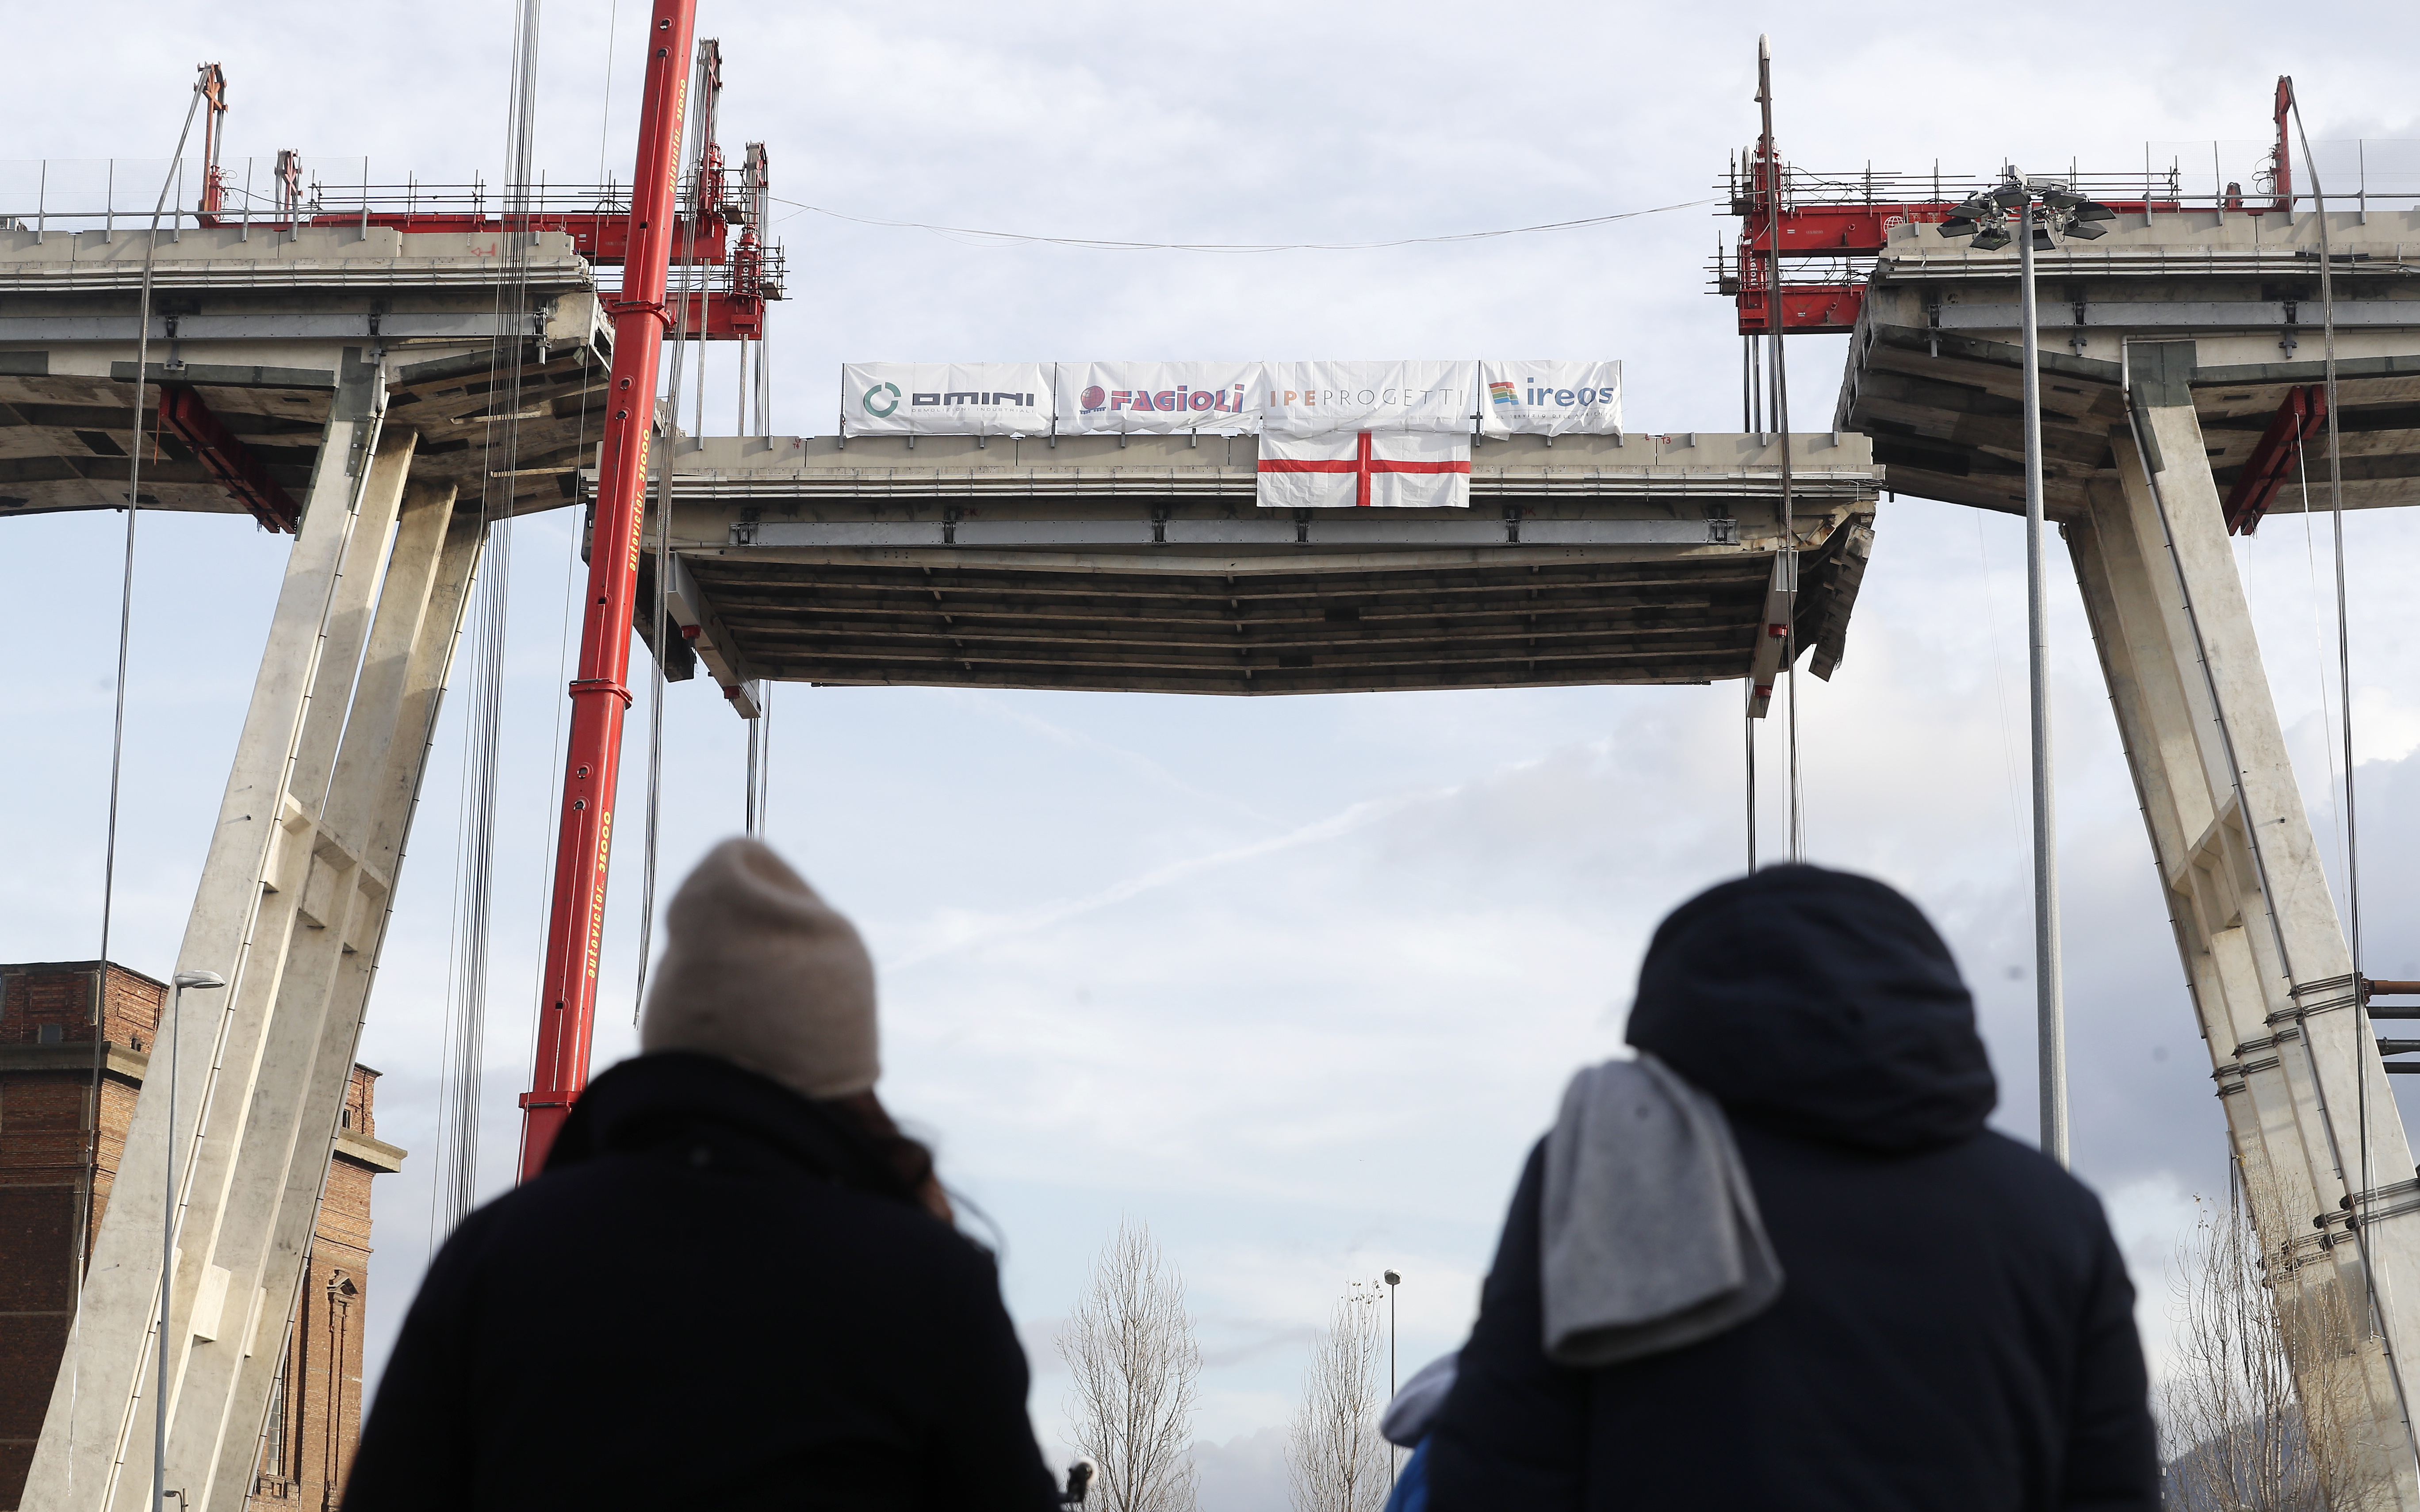 People look at cranes as they lower a section of the Morandi bridge in Genoa, Italy, Saturday, Feb. 9, 2019. Workers taking apart the remains of a bridge which collapsed in Aug. 2018 are set to remove a 40 meter beam, seen in between the red machinery. A large section of the bridge collapsed over an industrial area in the Italian city of Genova last summer during a sudden and violent storm, leaving vehicles crushed in rubble below and killing 43 people. (AP Photo/Antonio Calanni)